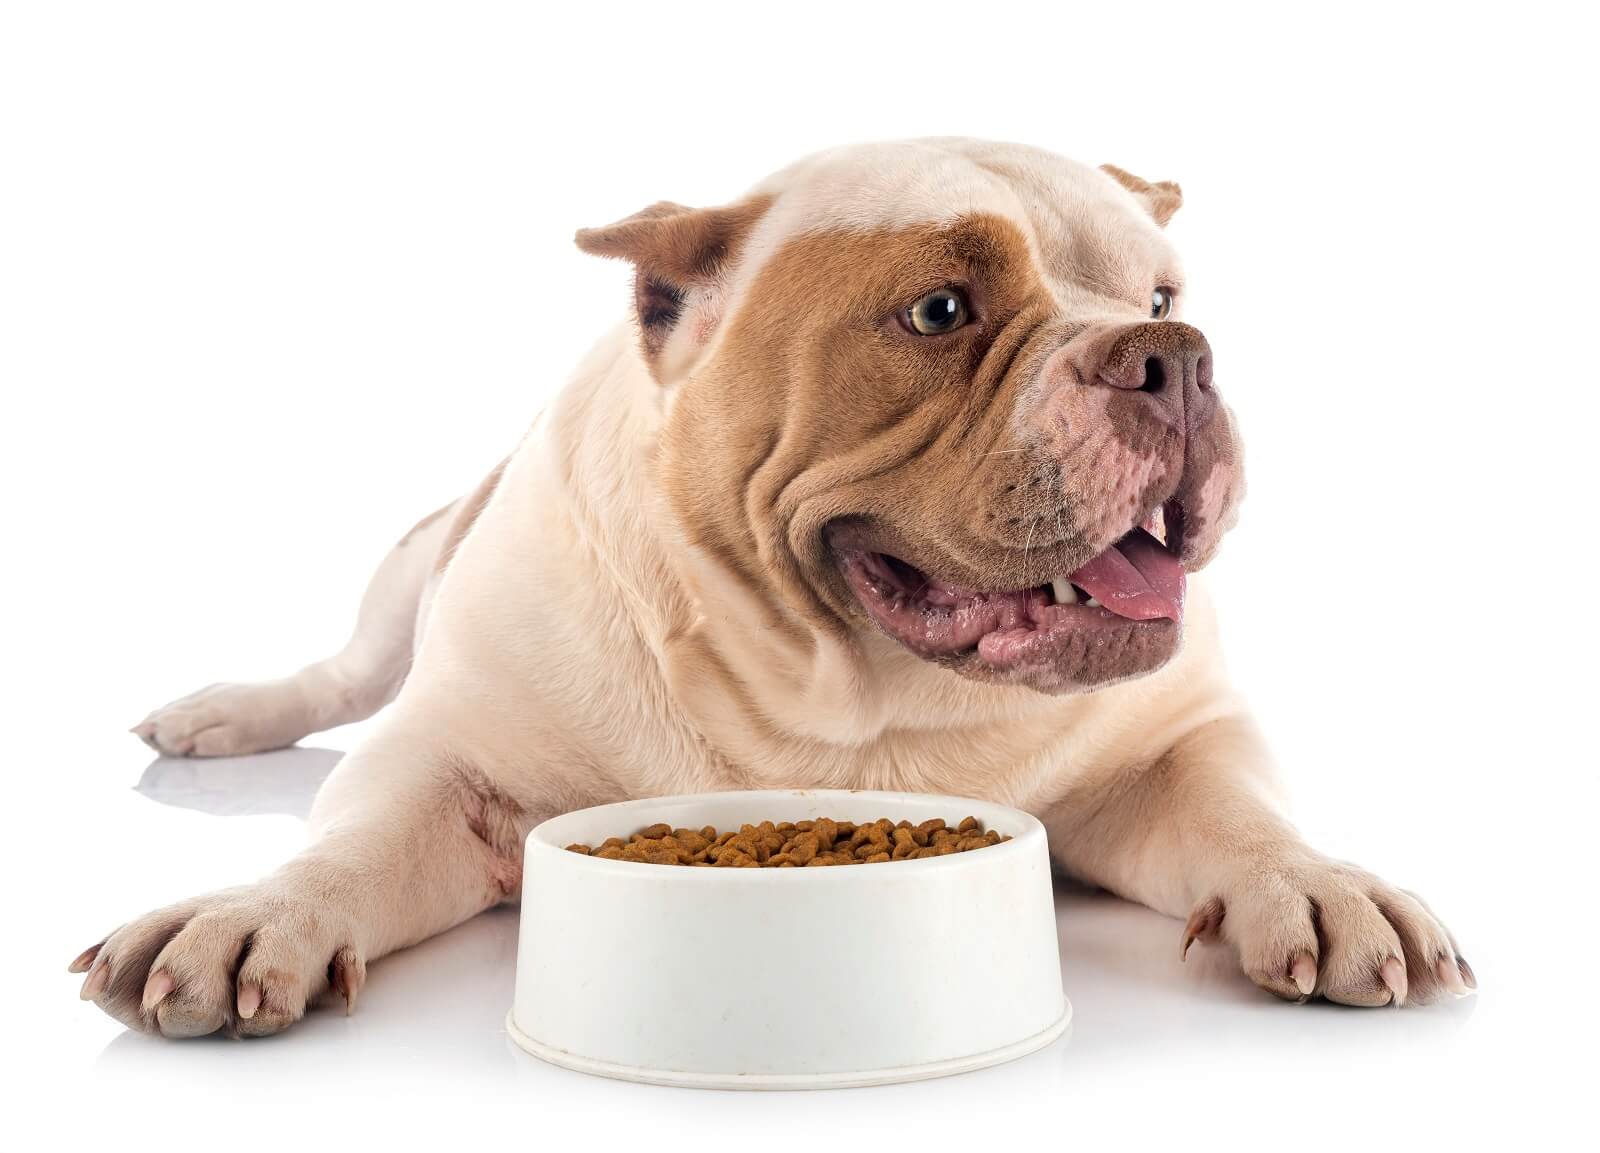 How To Add Calories To Your Dog's Diet